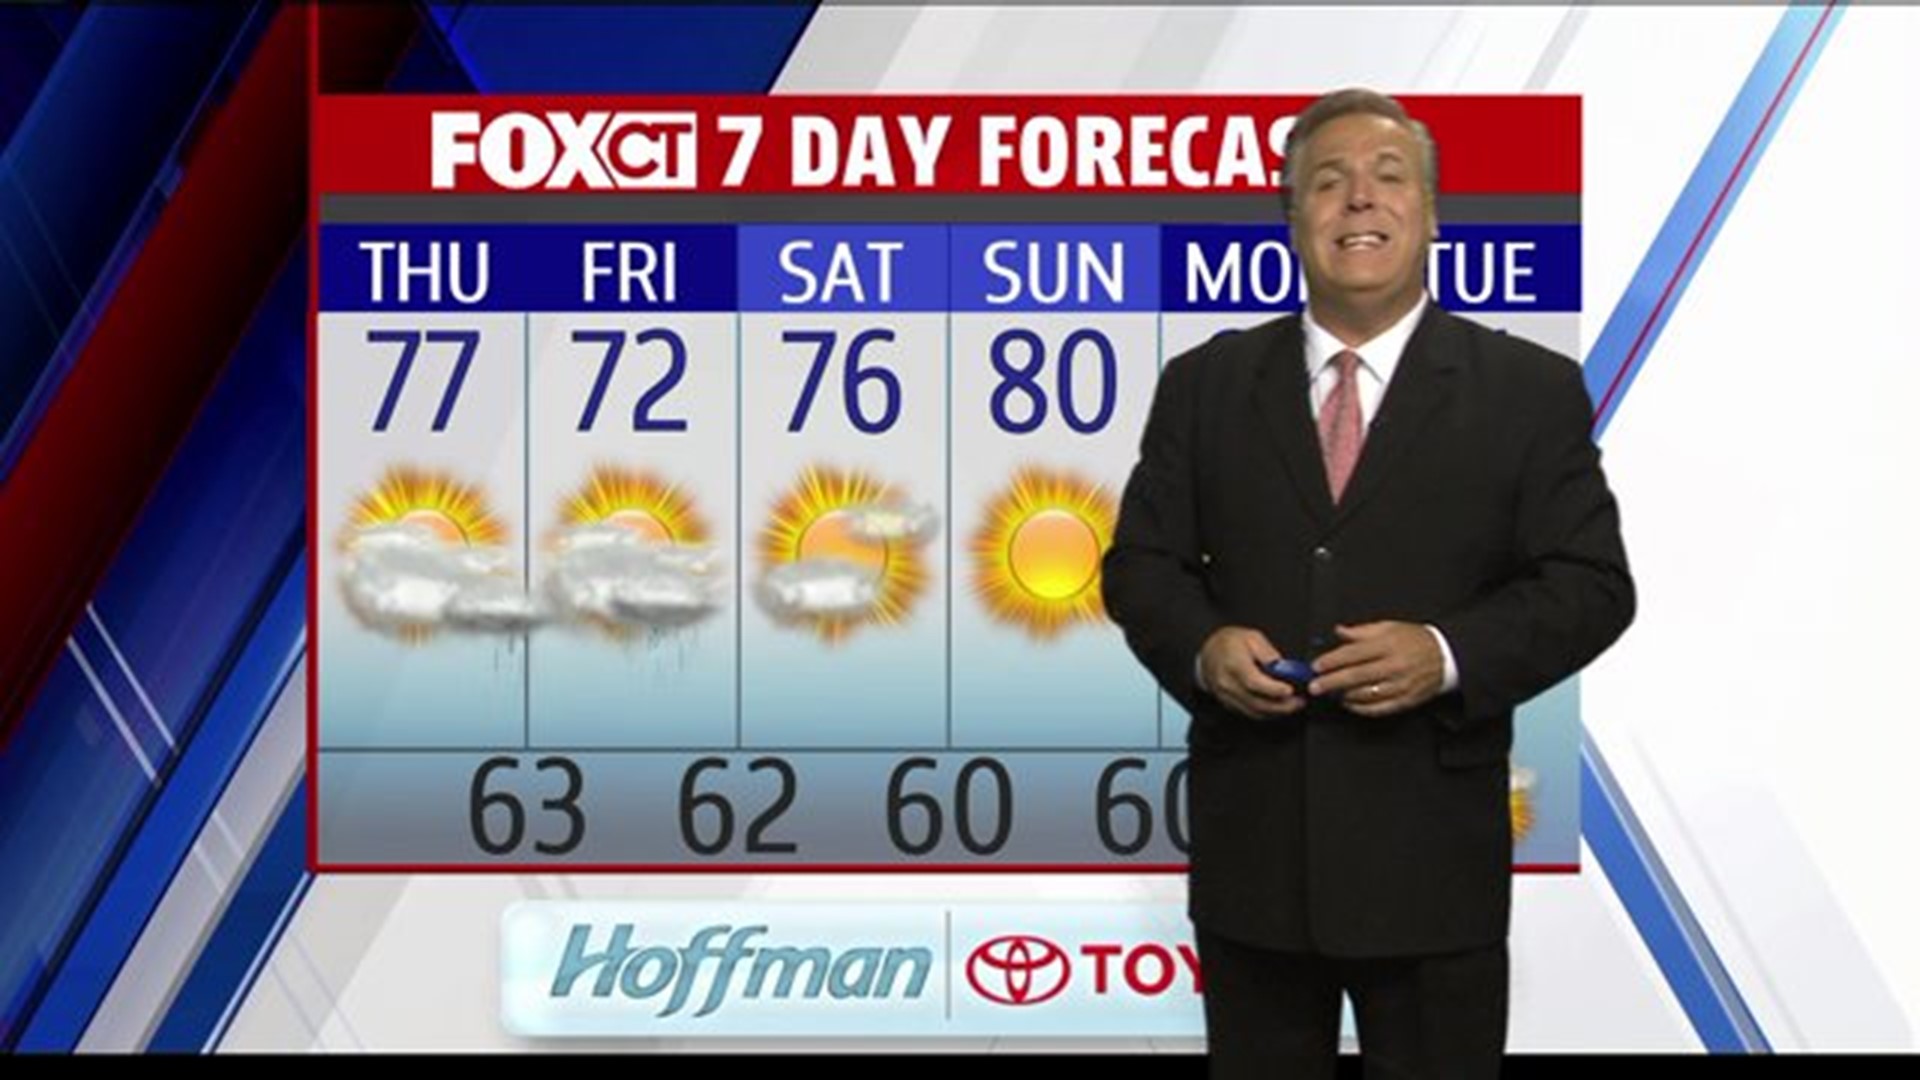 Thursday Weather: Mostly Cloudy, Cooler